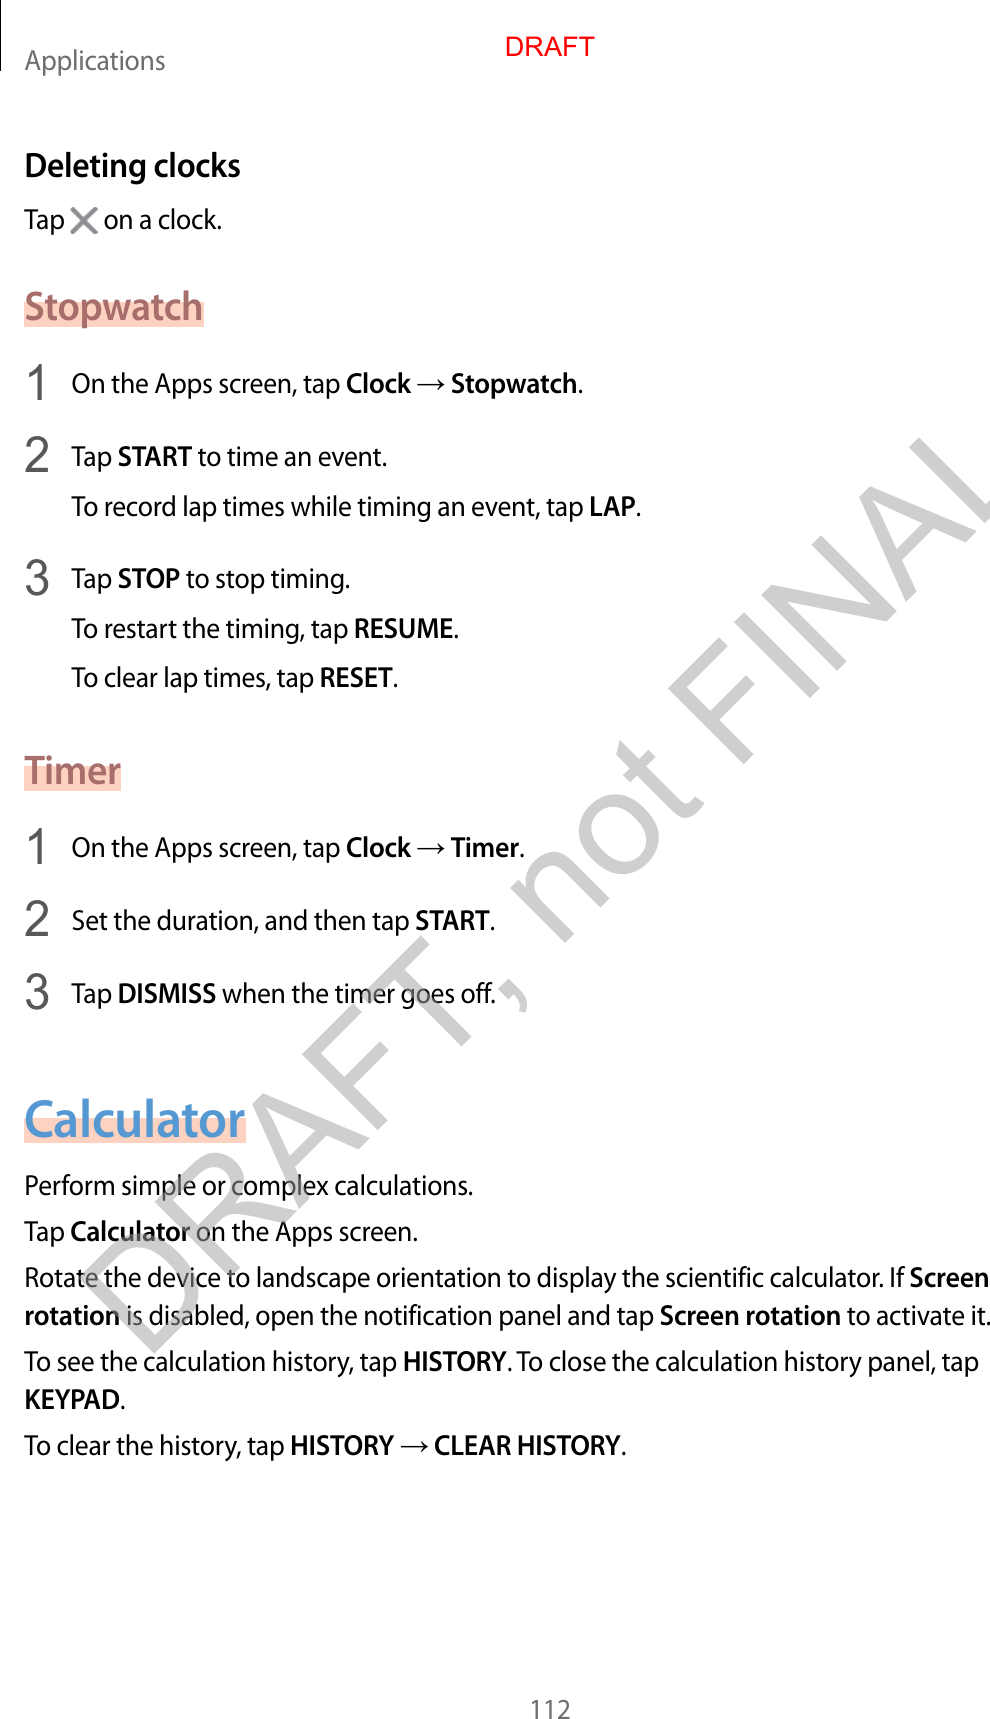 Applications112Deleting clocksTap   on a clock.Stopwatch1  On the Apps screen, tap Clock  Stopwatch.2  Tap START to time an even t.To recor d lap times while timing an ev en t, tap LAP.3  Tap STOP to stop timing .To restart the timing, tap RESUME.To clear lap times, tap RESET.Timer1  On the Apps screen, tap Clock  Timer.2  Set the duration, and then tap START.3  Tap DISMISS when the timer goes off.CalculatorP erform simple or complex calculations .Tap Calculator on the Apps screen.Rotate the device t o landscape orientation t o display the scien tific calculat or. If Screen rotation is disabled, open the notification panel and tap Screen rota tion to activate it.To see the calculation history , tap HISTORY. To close the calculation history panel, tap KEYPAD.To clear the history, tap HISTORY  CLEAR HISTORY.DRAFTDRAFT, not FINAL